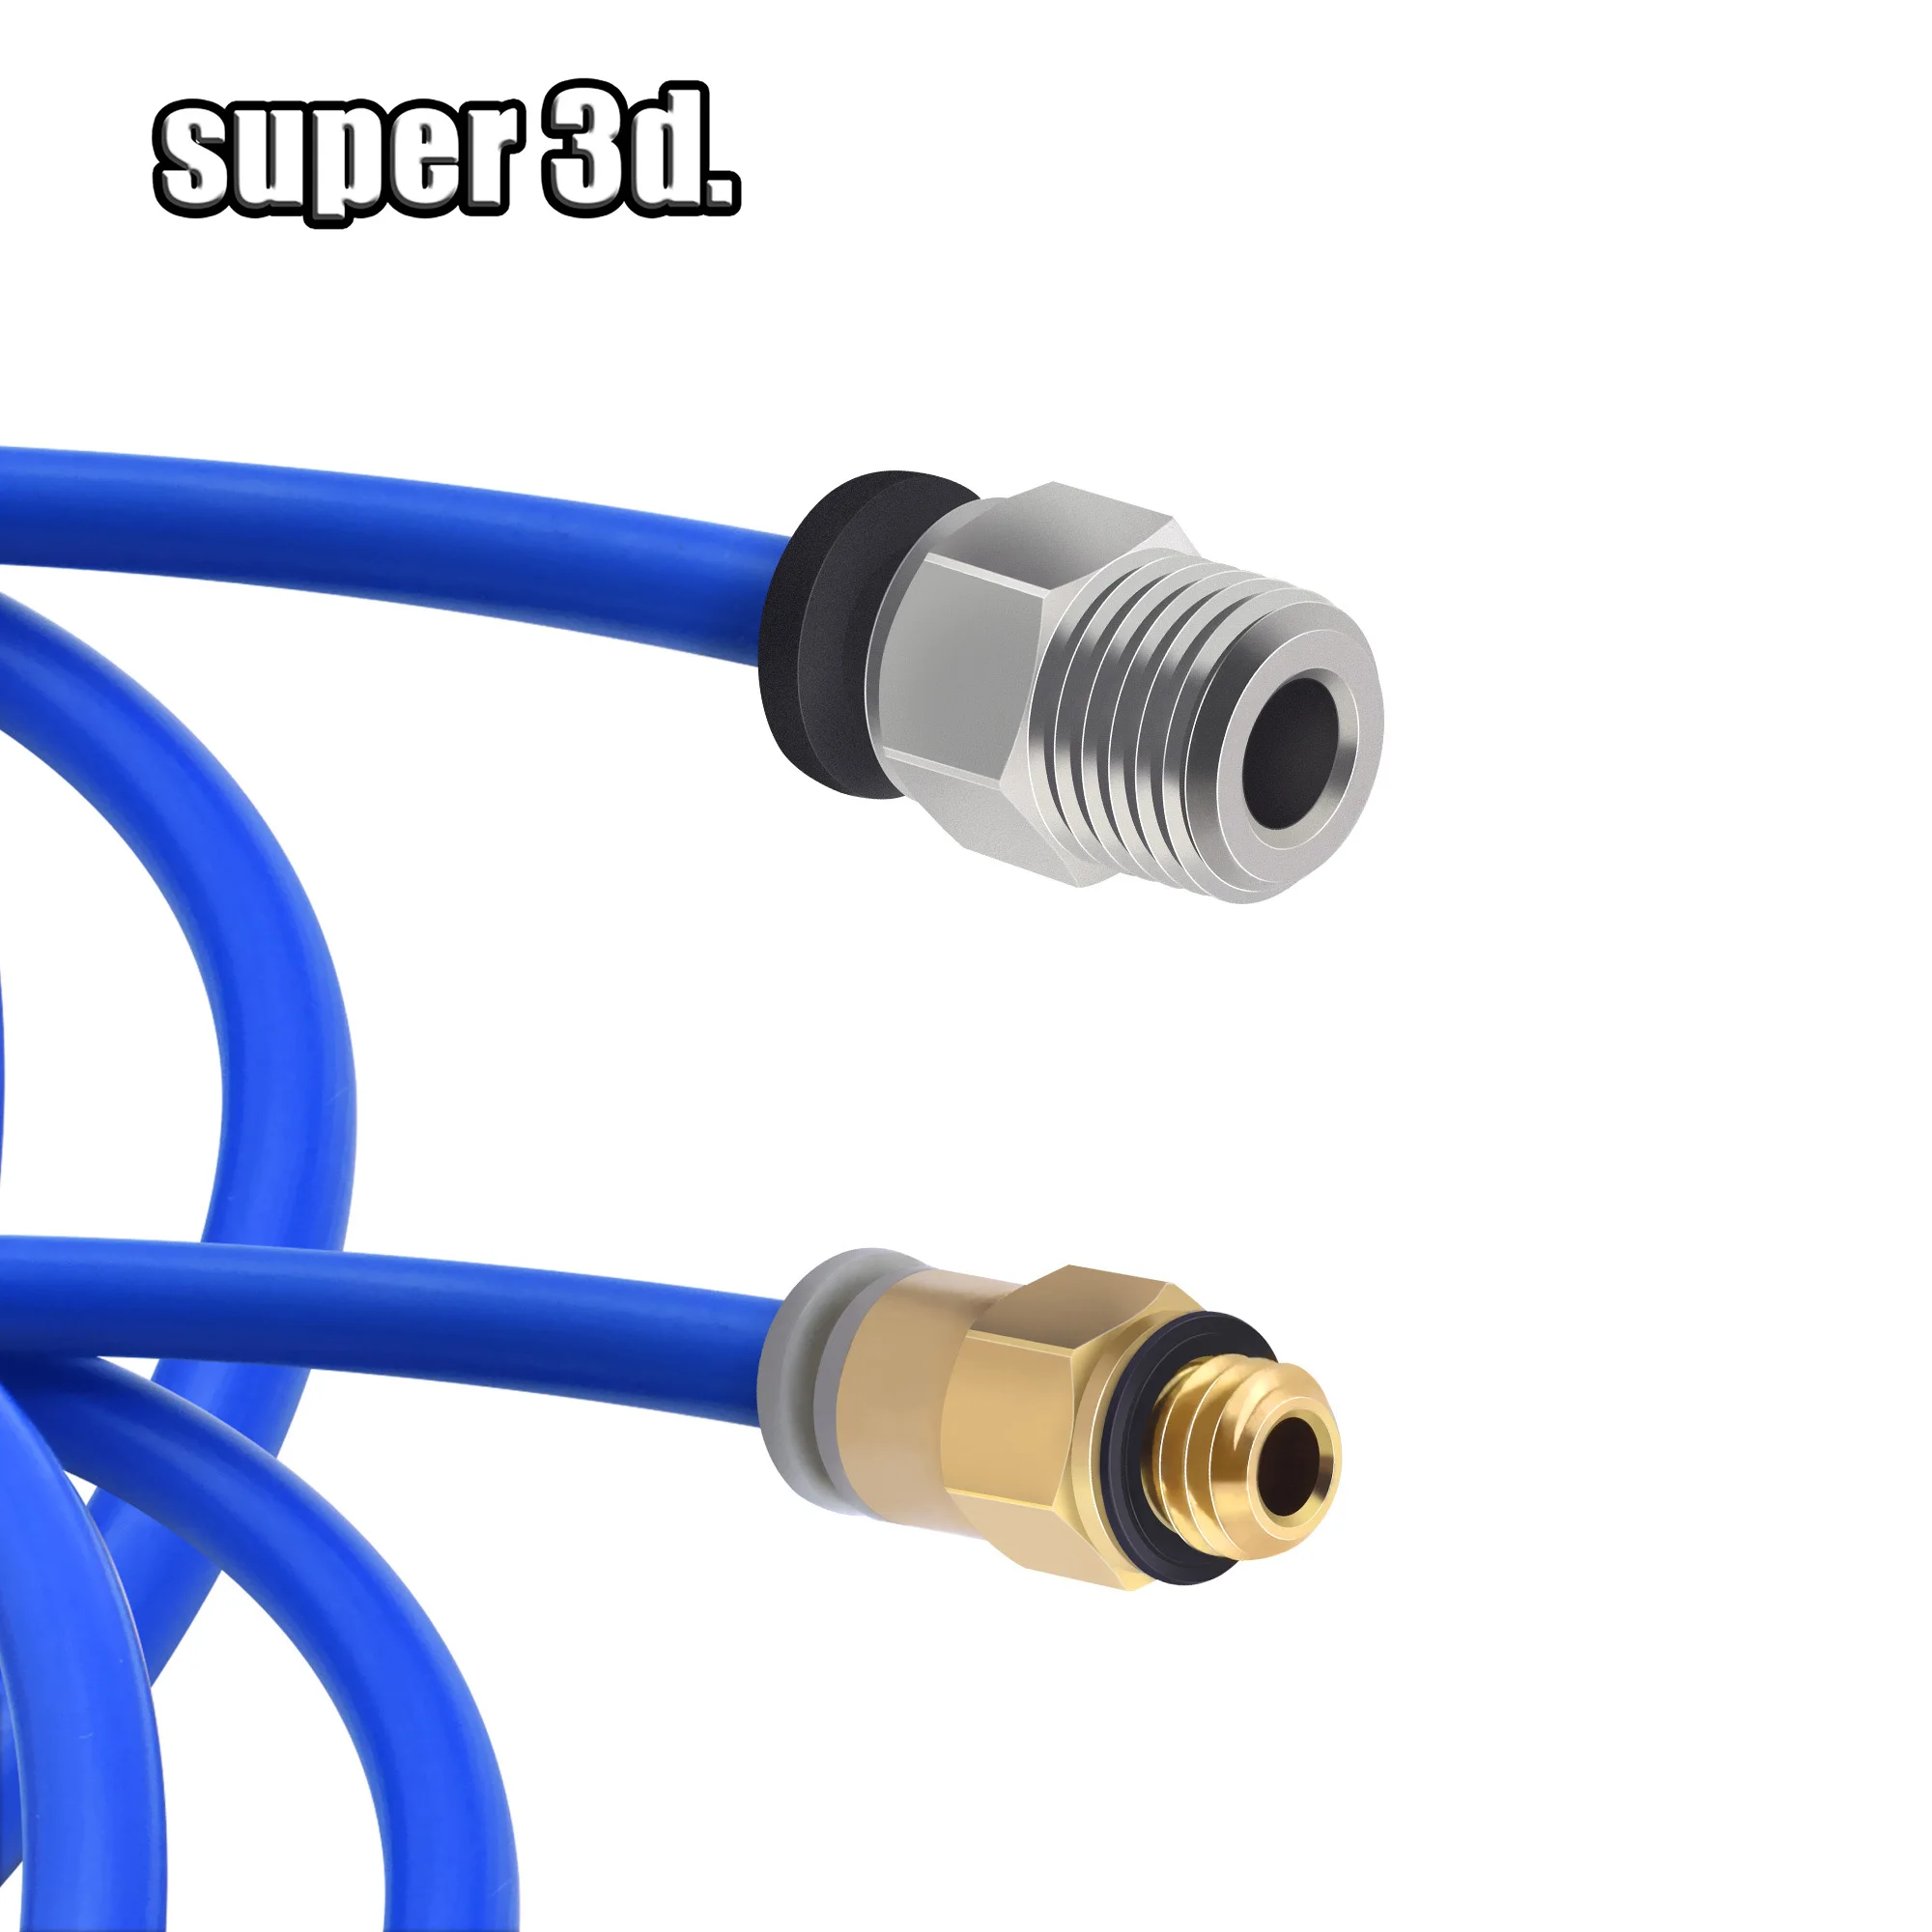 1 meter blue PFA PTFE tube 1.75mm ID 2mm OD 4mm PiPe + SMC quick connector pc4 m6 Fittings+black pneumatic connector bowden